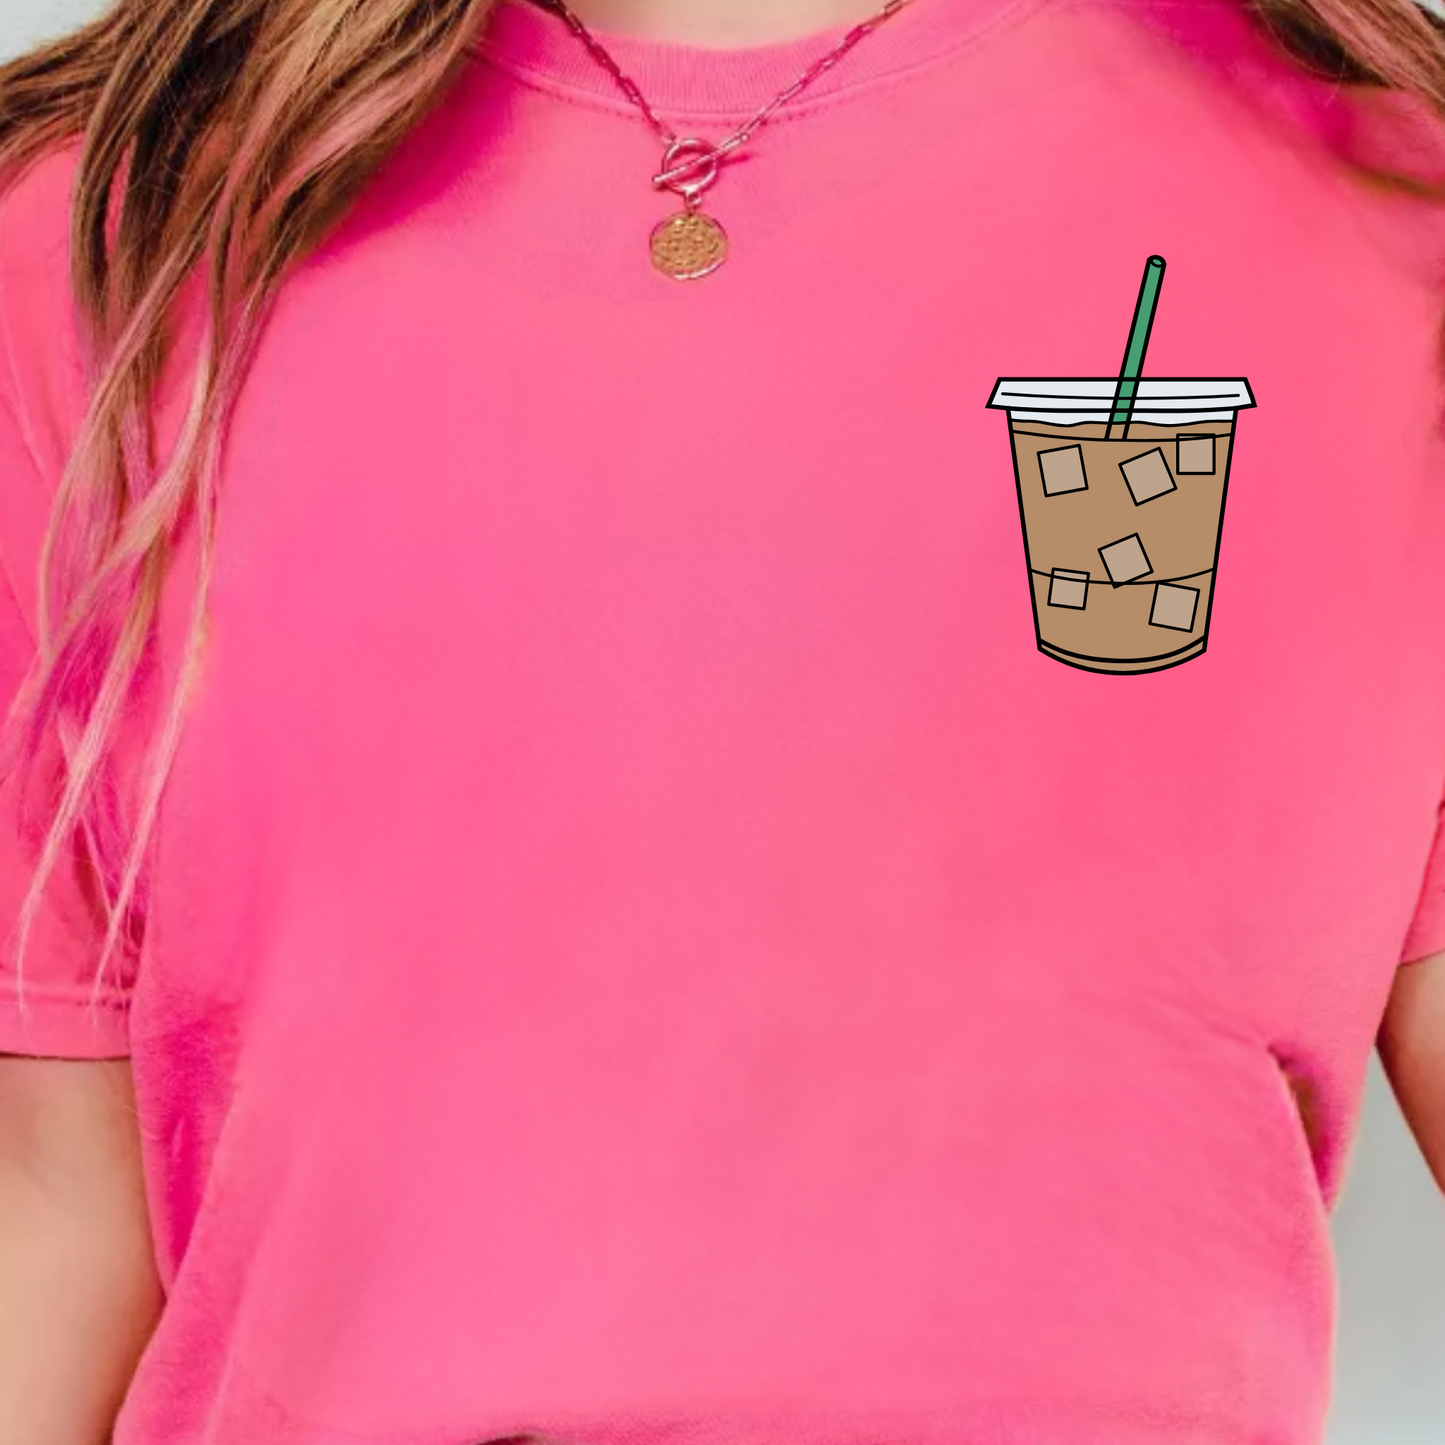 (Shirt not included) Iced Coffee POCKET - Clear Film Transfer